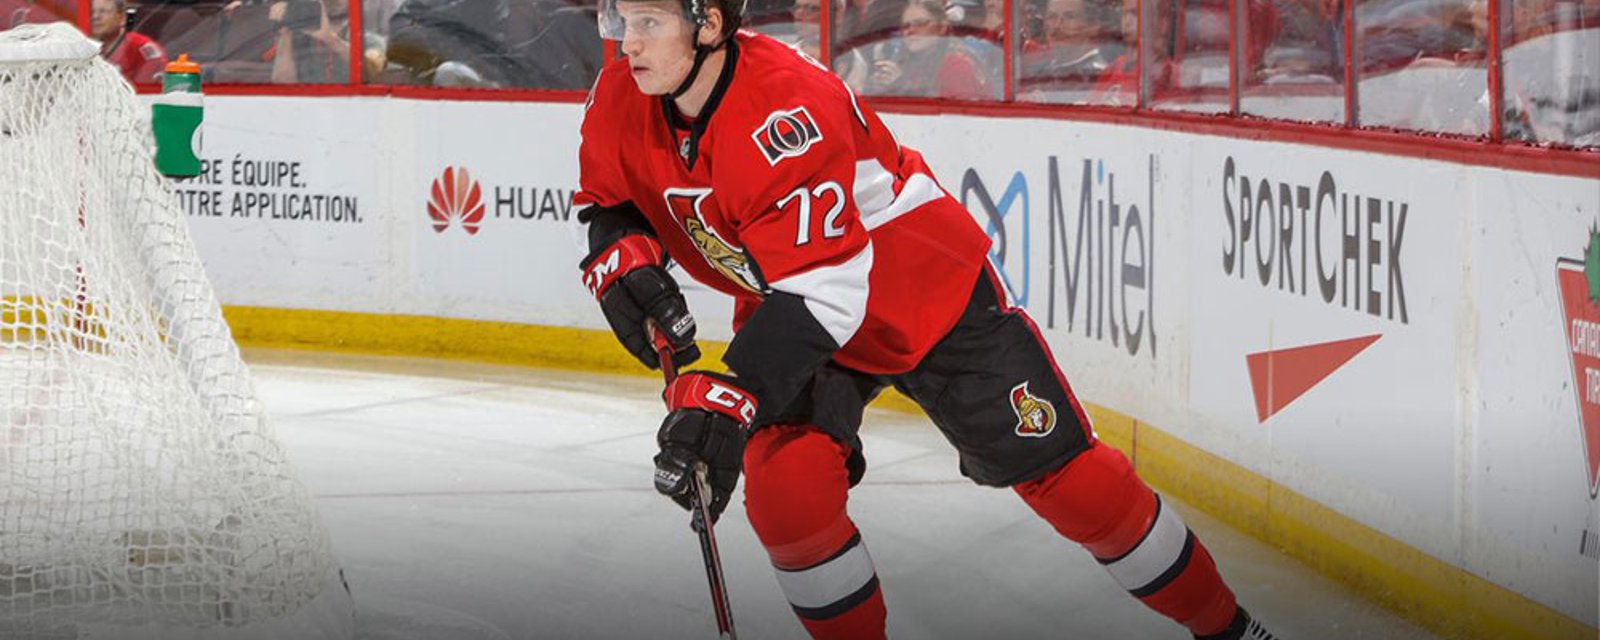 Report: Sens’ GM makes bold prediction for top prospect Chabot